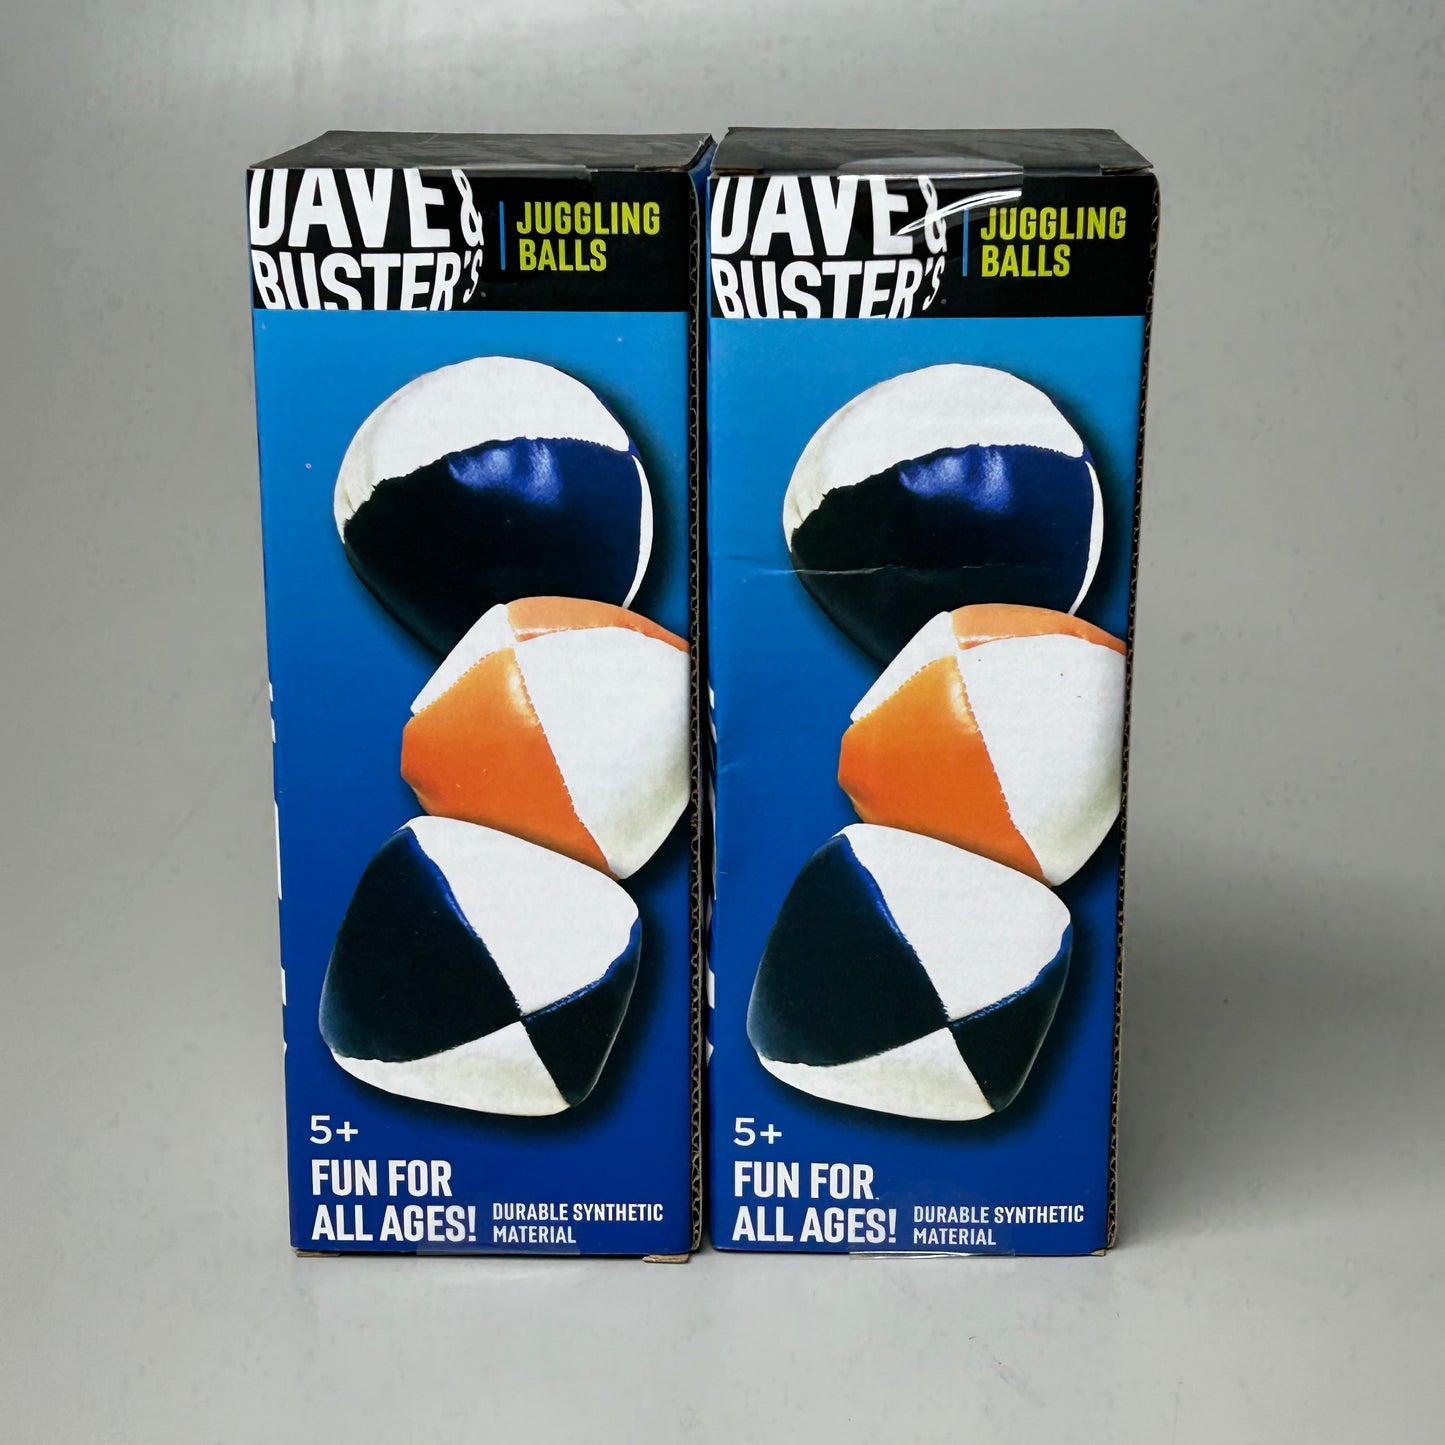 DAVE & BUSTER'S 6-PK! Juggling Balls for All Ages! 18793 (New)